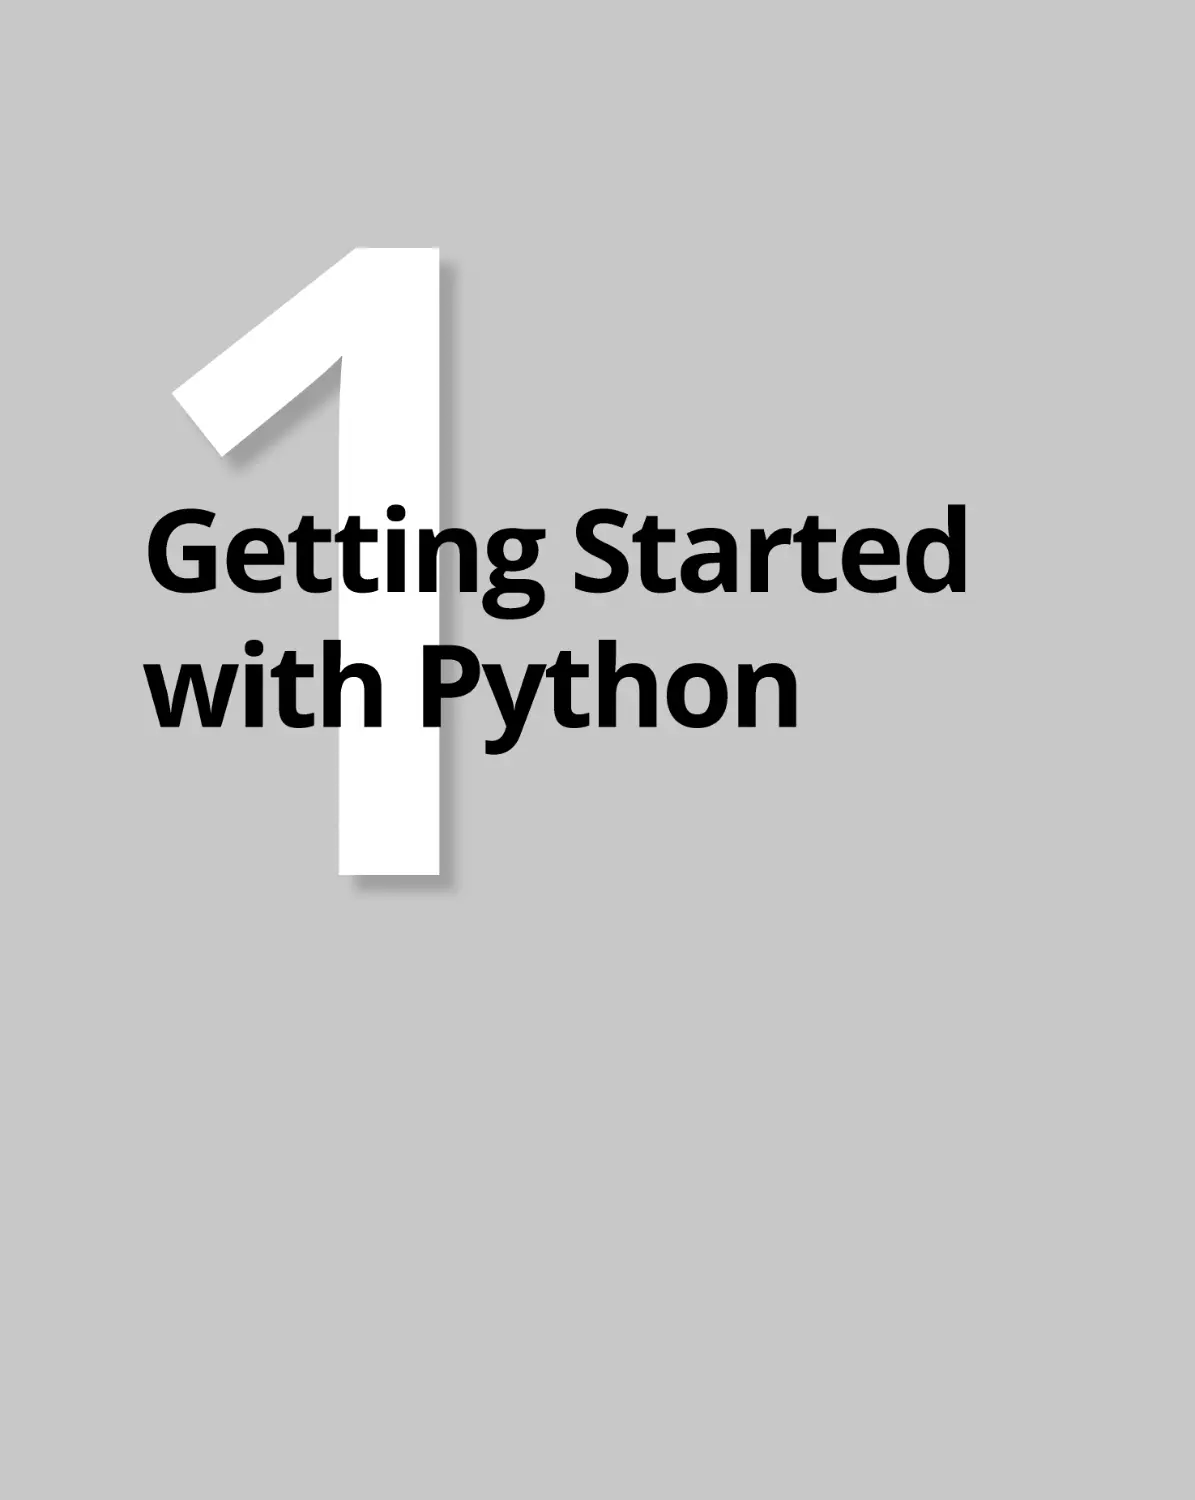 Book
1 Getting Started with Python